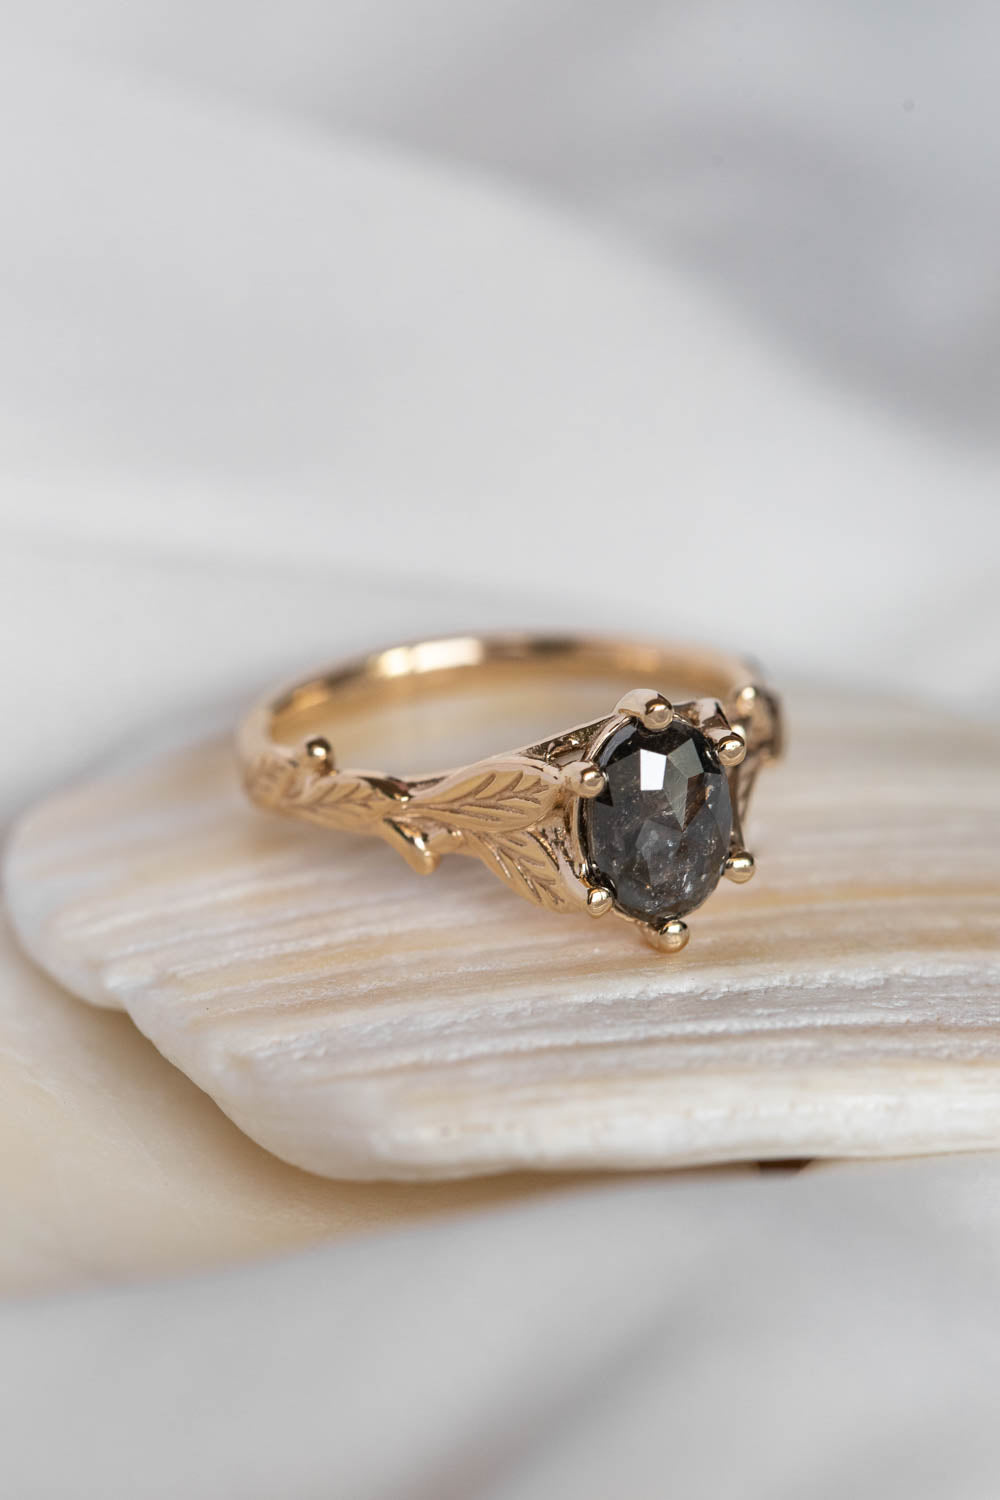 White Gold Diamond Ring with Yellow Gold Details - Athena Jewelry